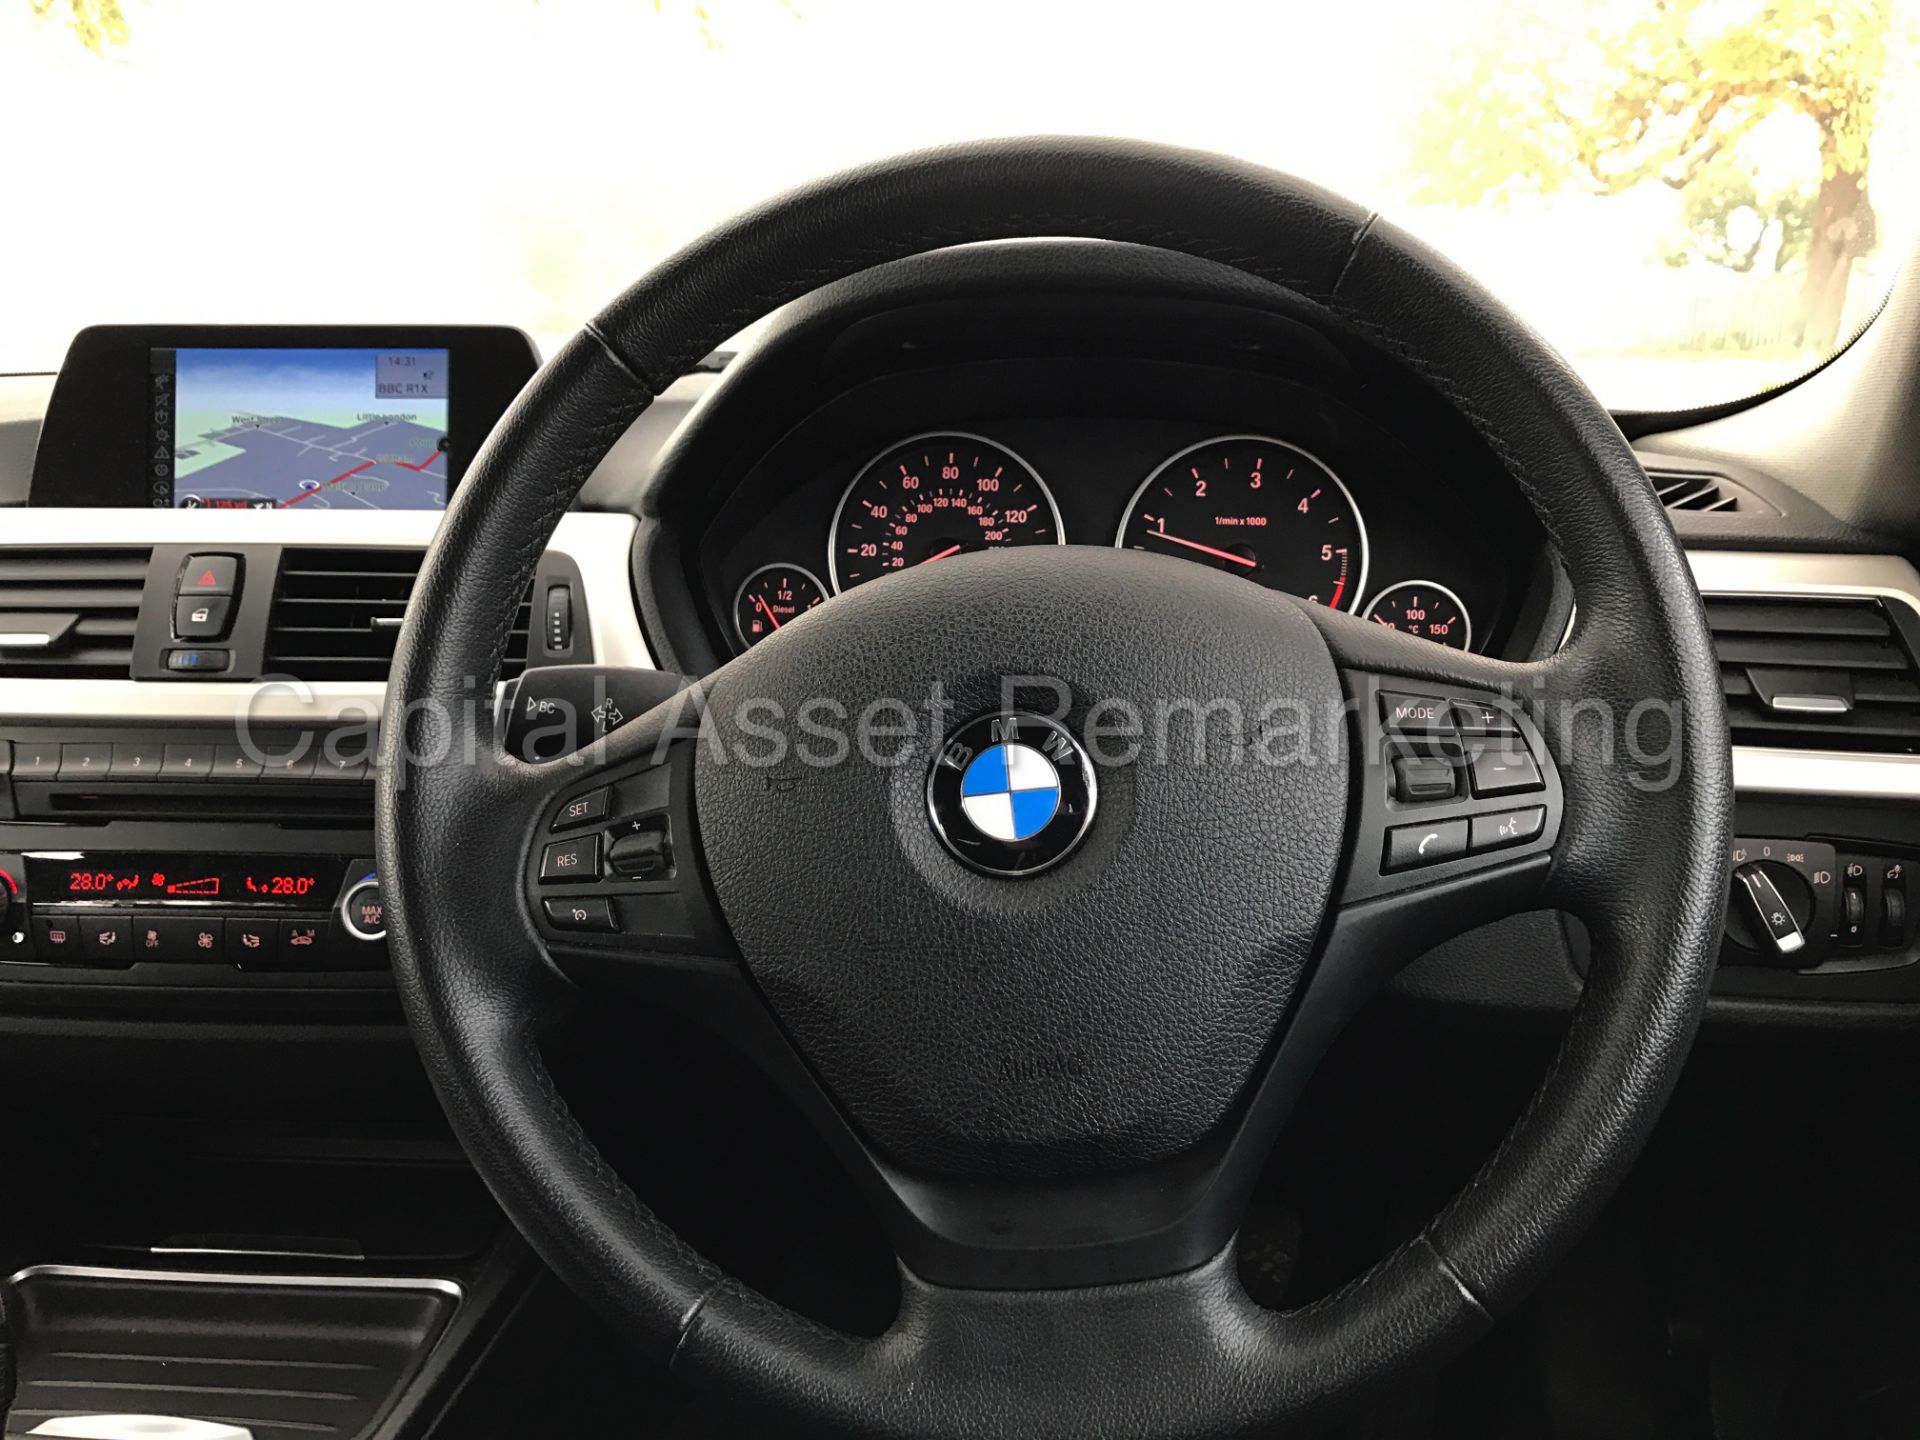 BMW 320d 'ESTATE / TOURING' (2014 MODEL) 8 SPEED AUTO - SAT NAV **FULLY LOADED** (1 OWNER FROM NEW) - Image 24 of 25